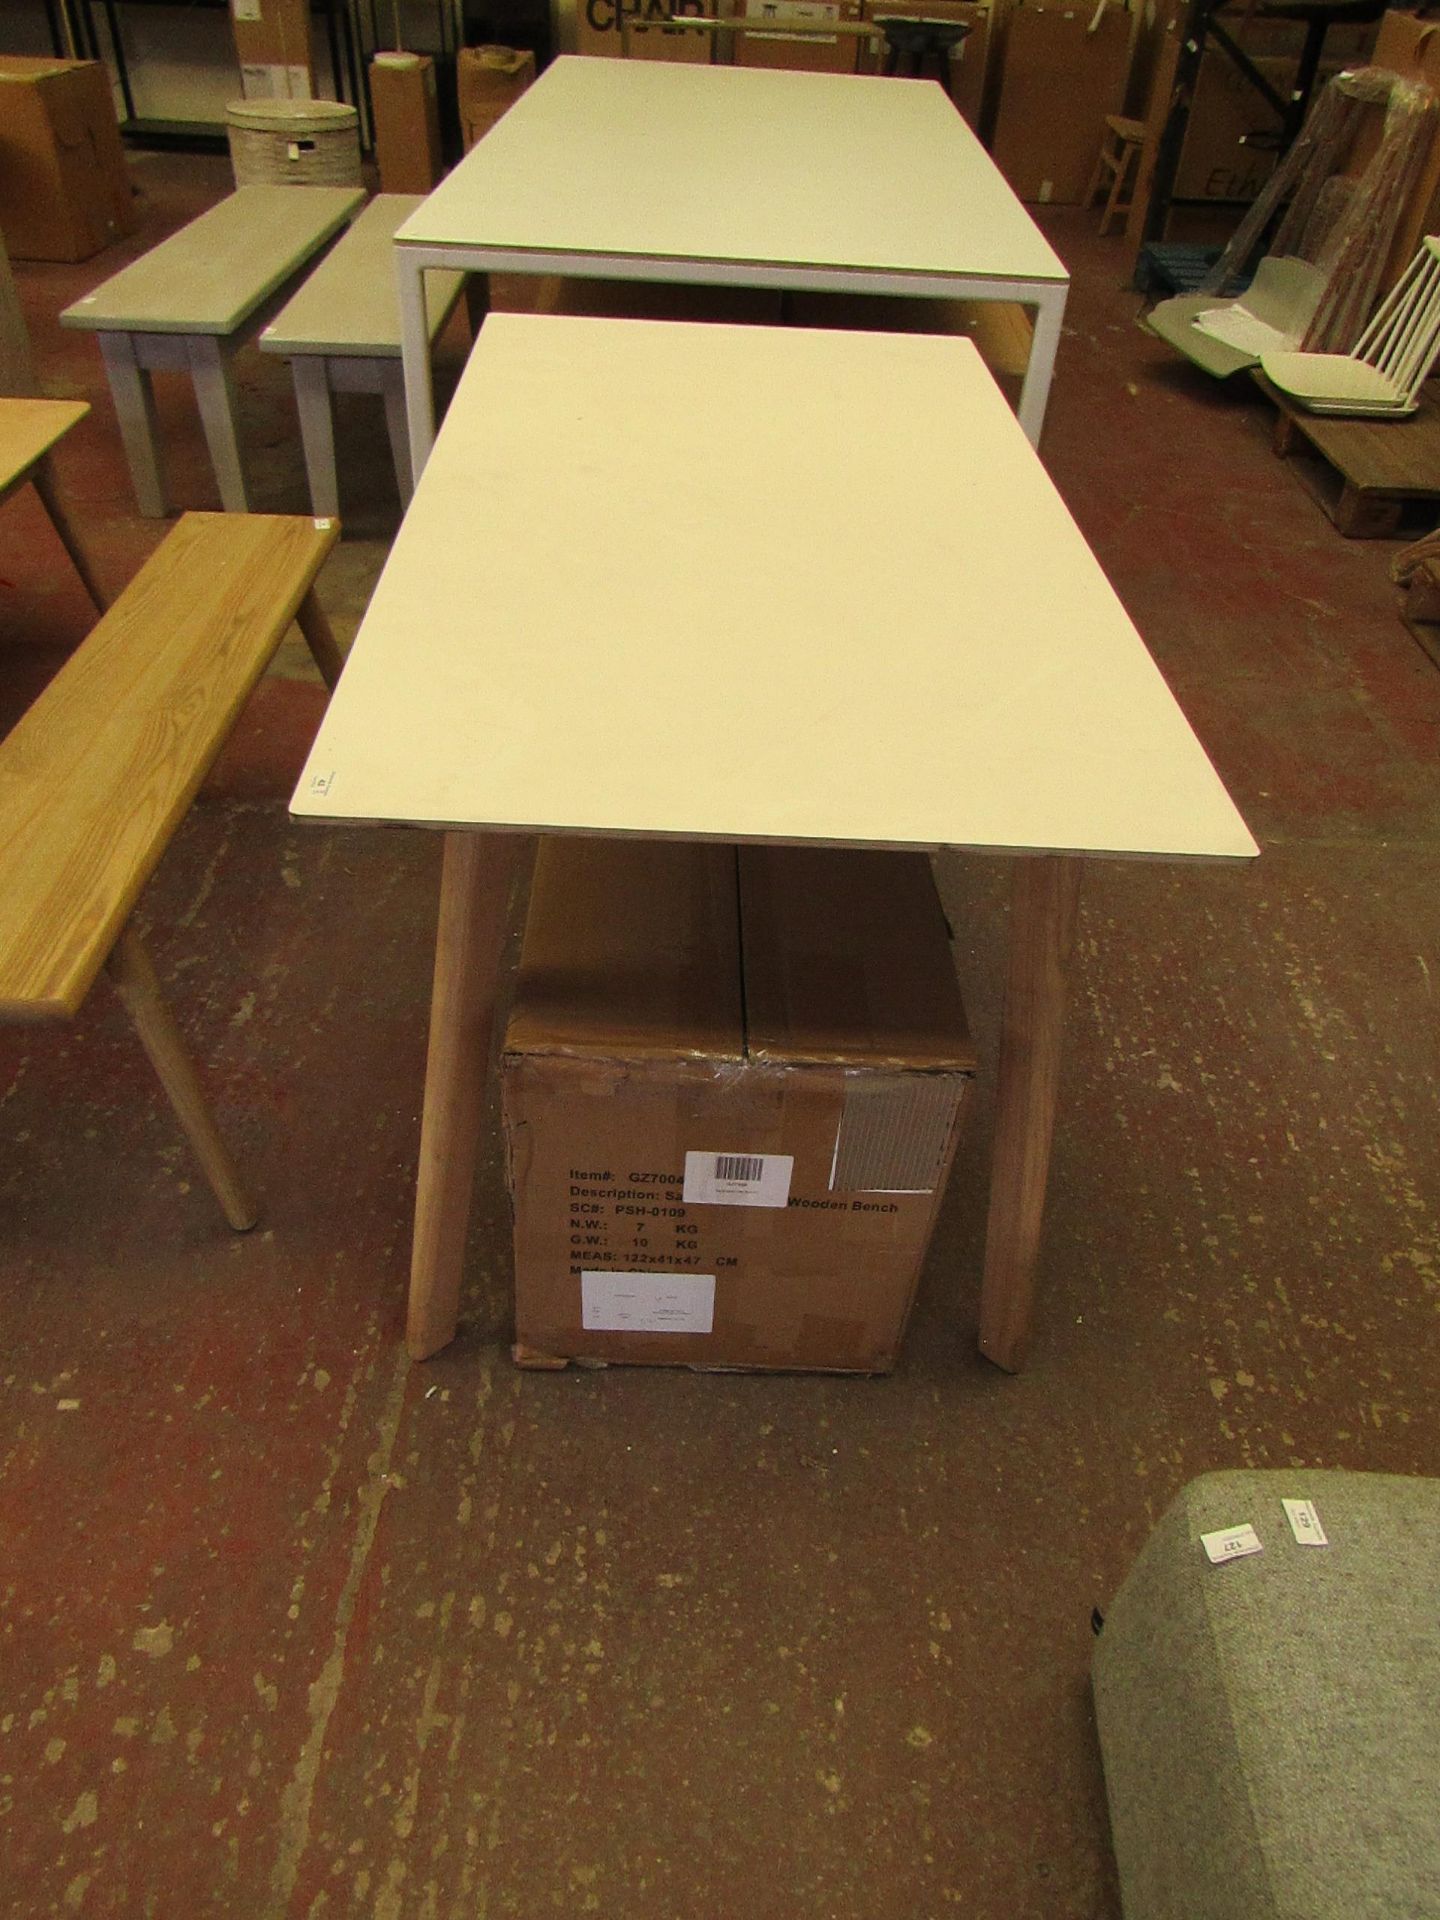 | 1X | HAY COPENHAGUE DINING TABLE 1.4 X 0.75MTRS | IN GOOD CONITION BUT HAS A SMALL BIT OF DAMAGE